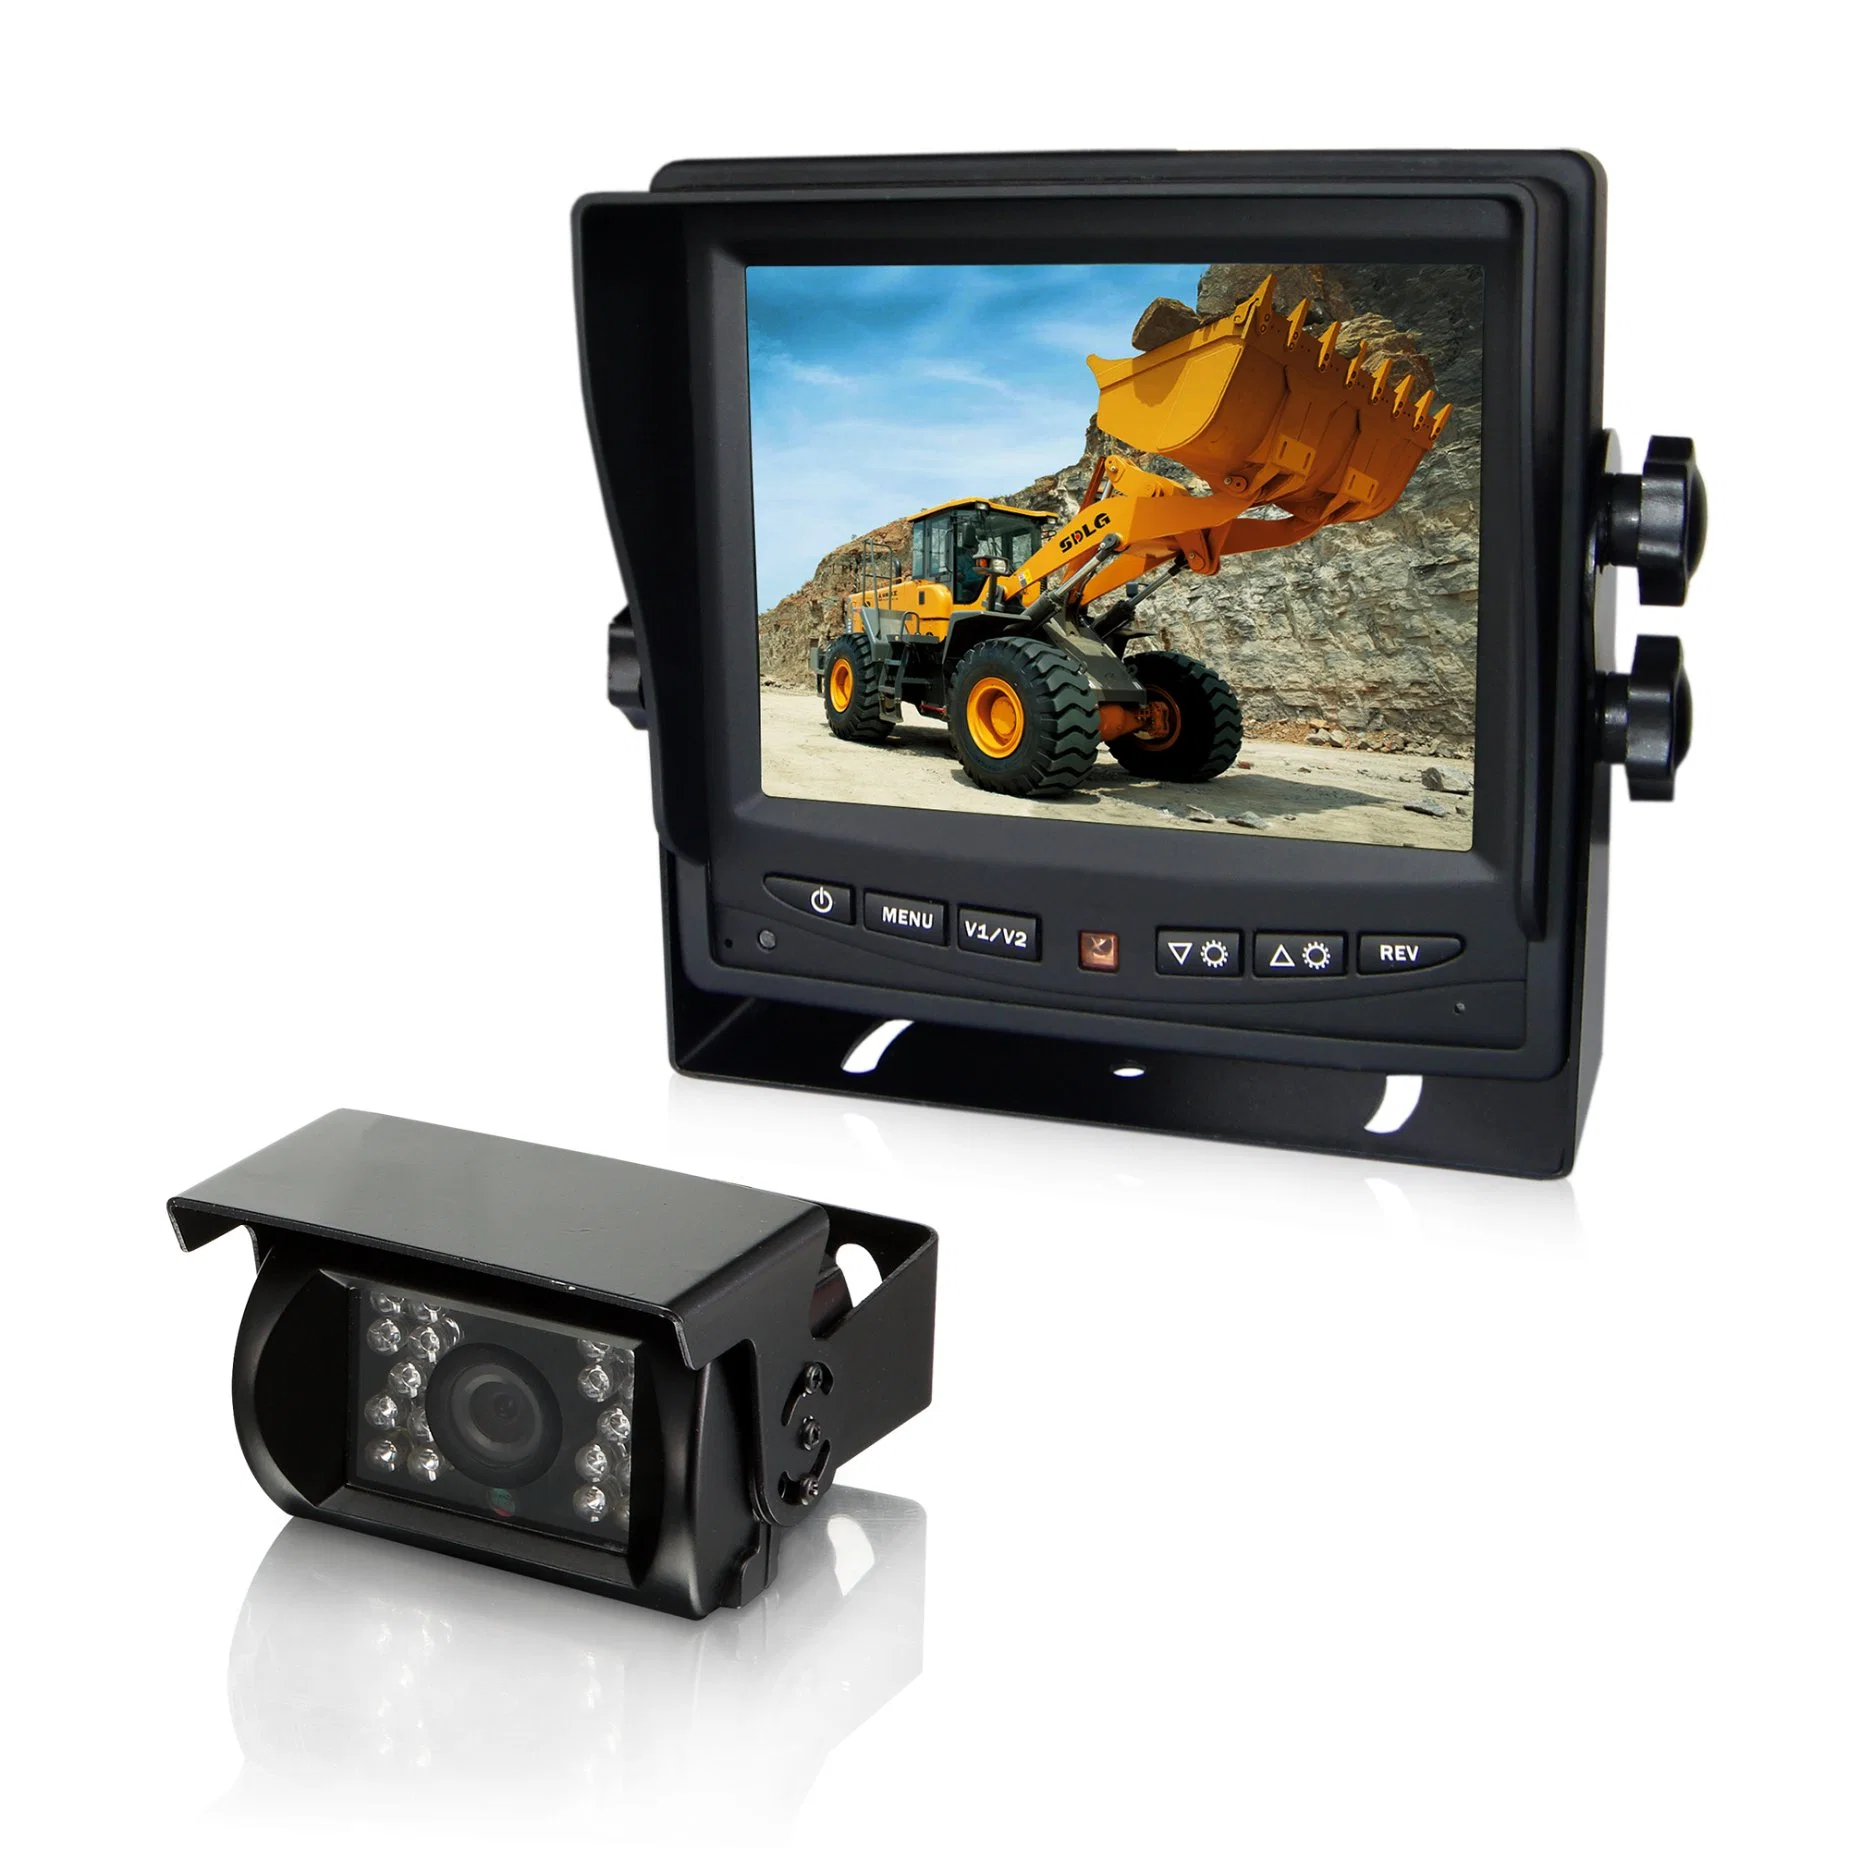 5.6inch LCD Car Monitor Car Rear View Camera System for Vehicles